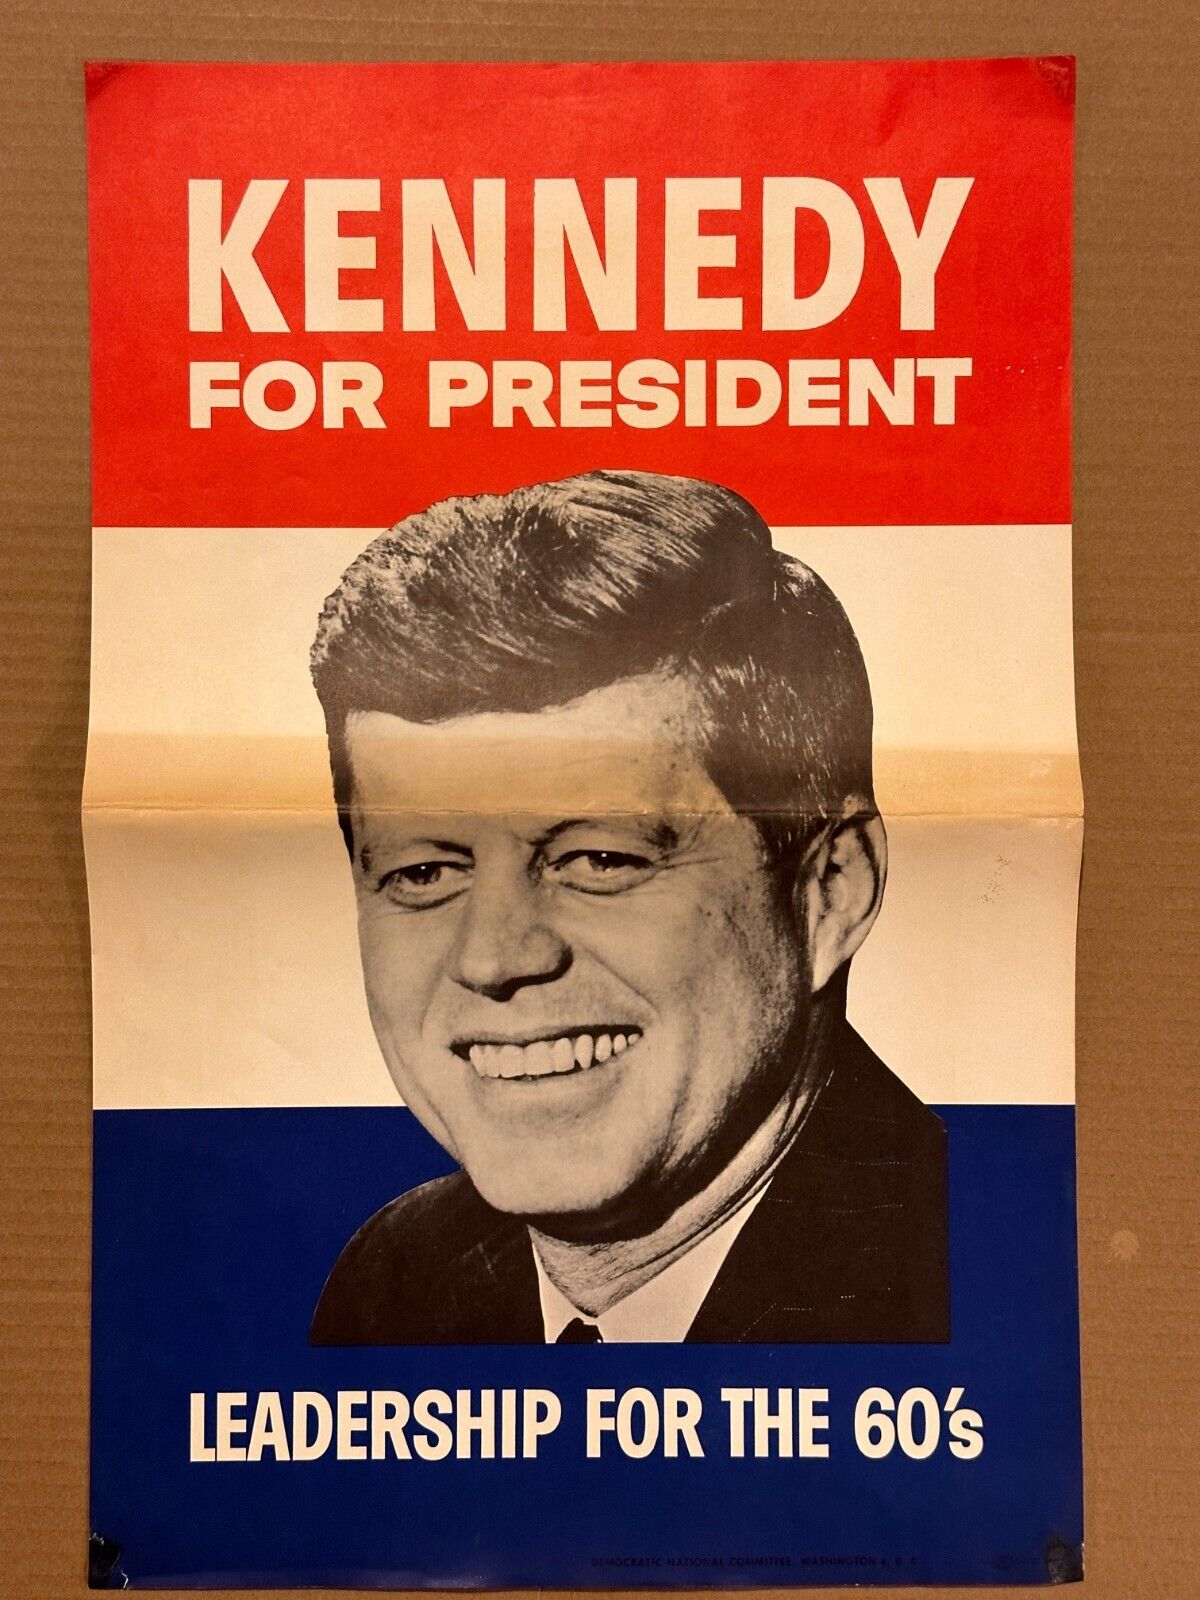 Original KENNEDY for president poster from 1960’s